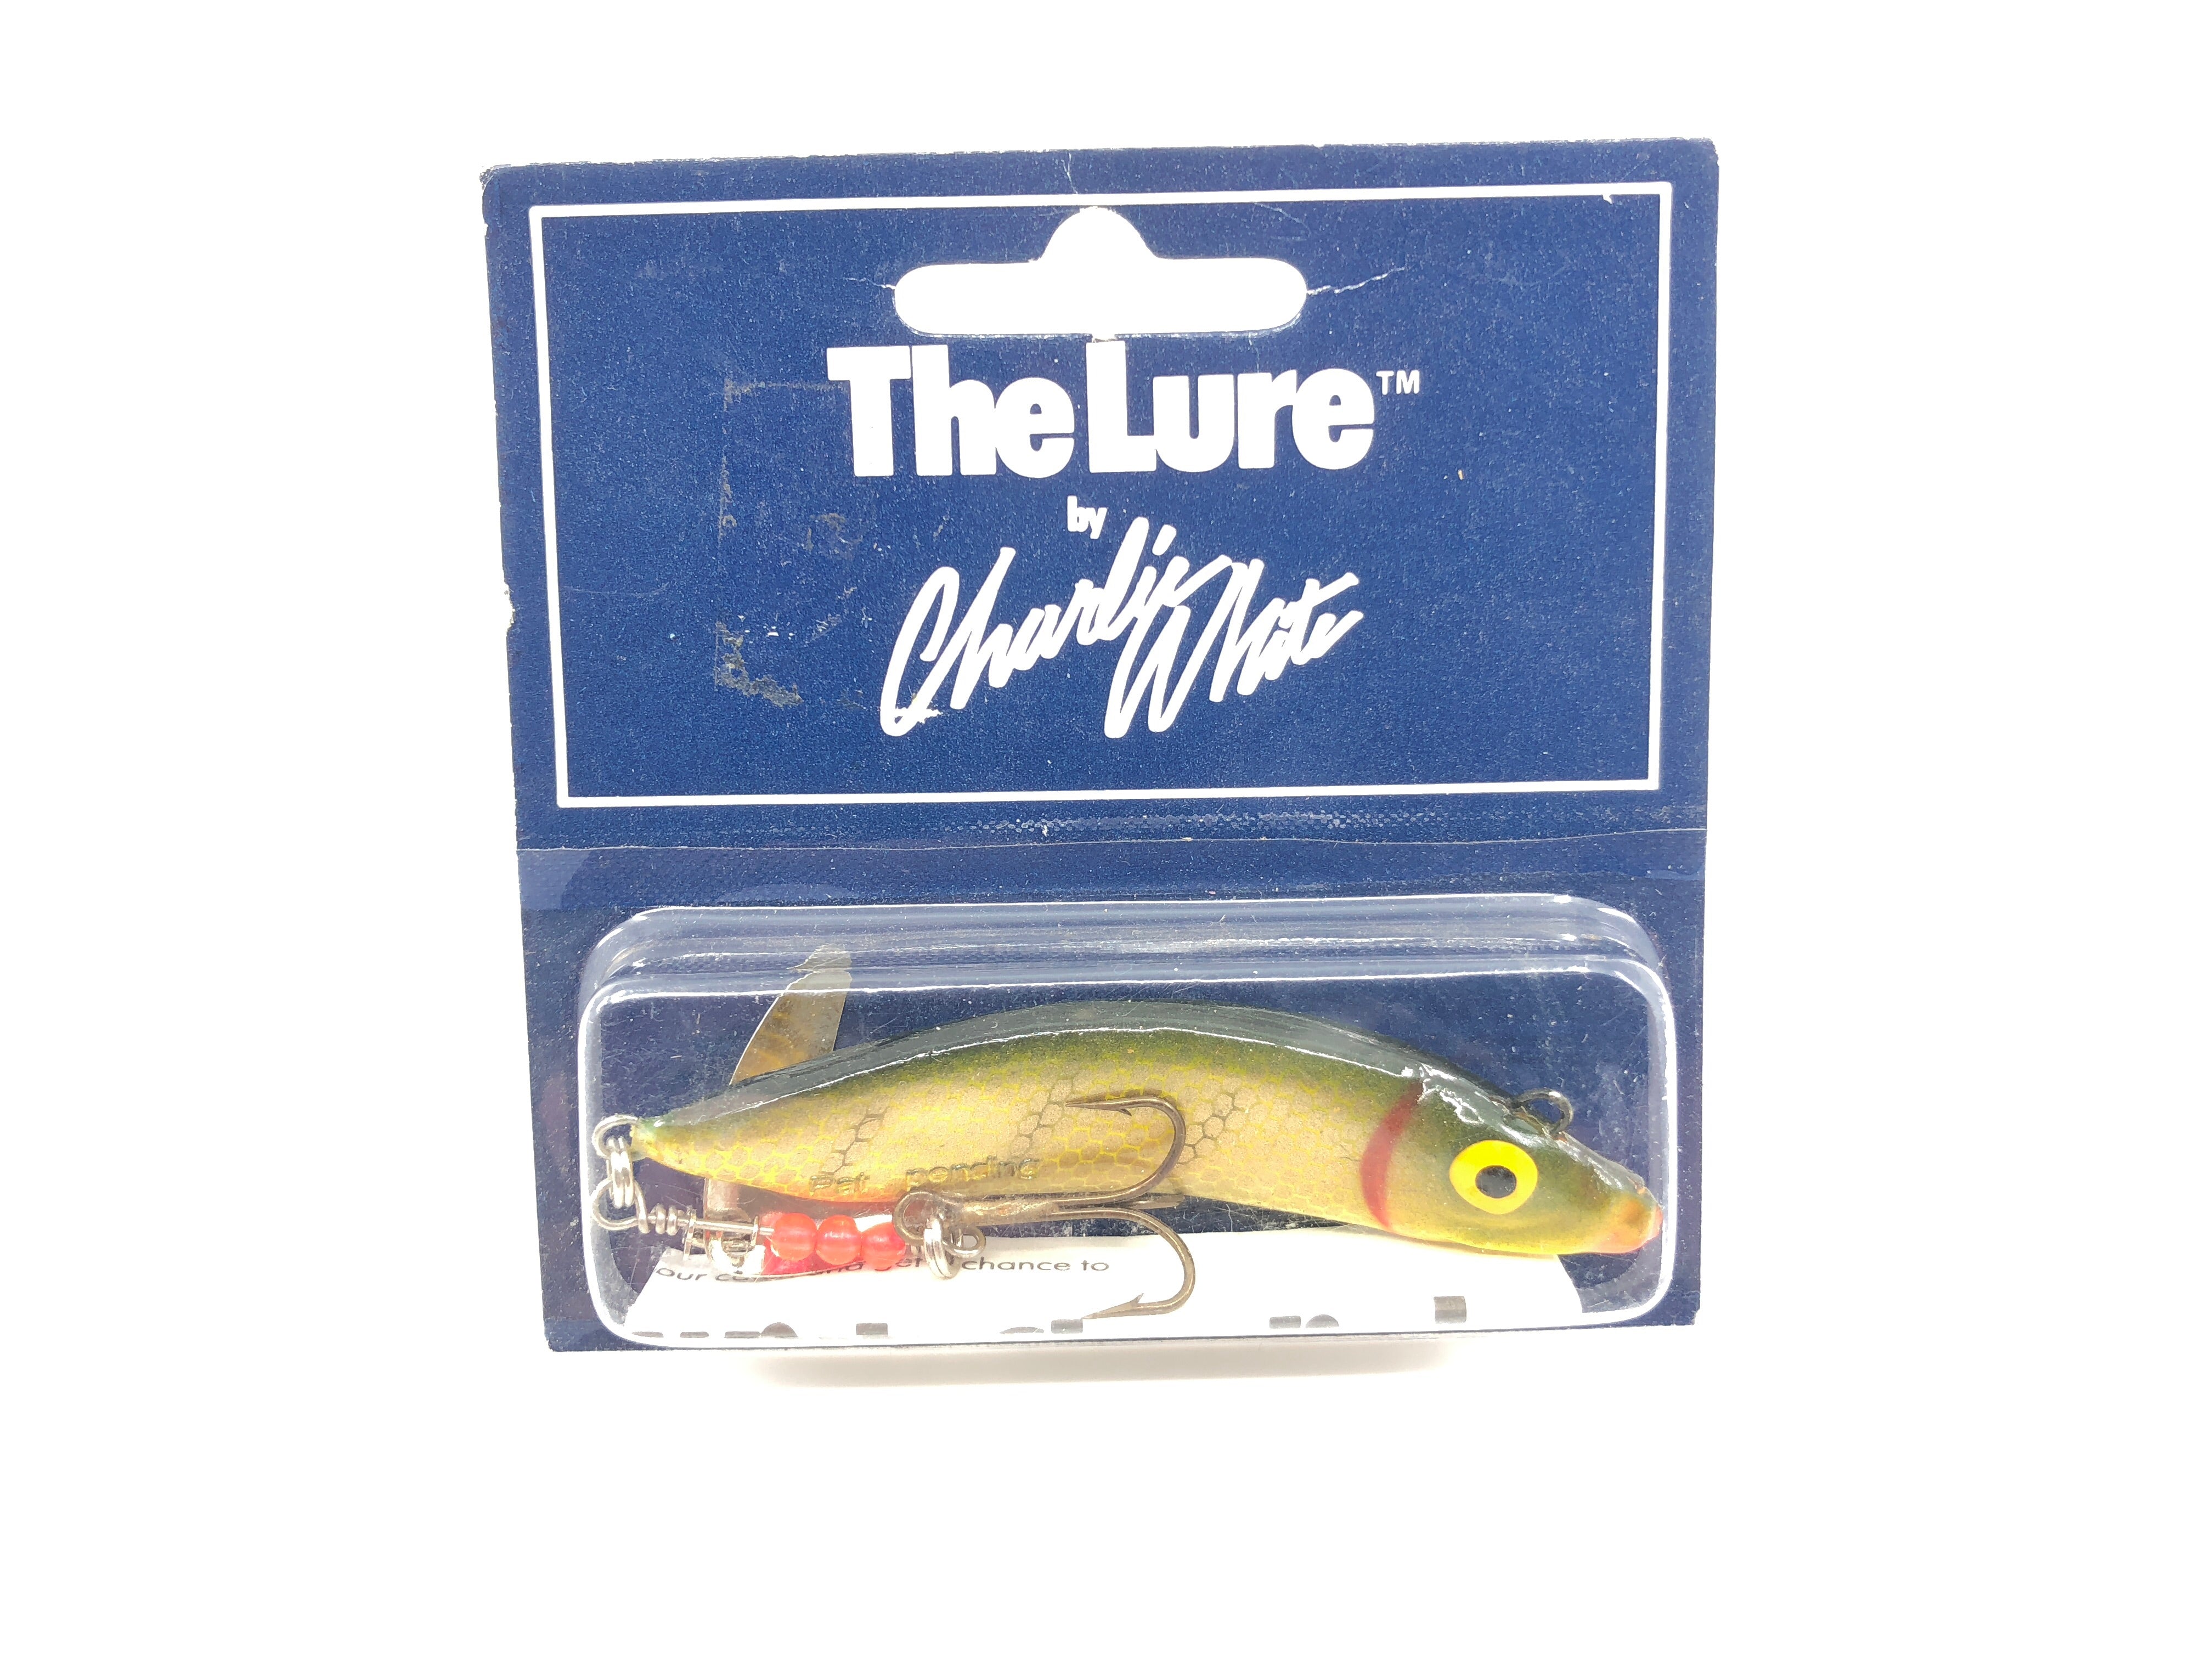 Vintage The Lure by Charlie White New on Card – My Bait Shop, LLC